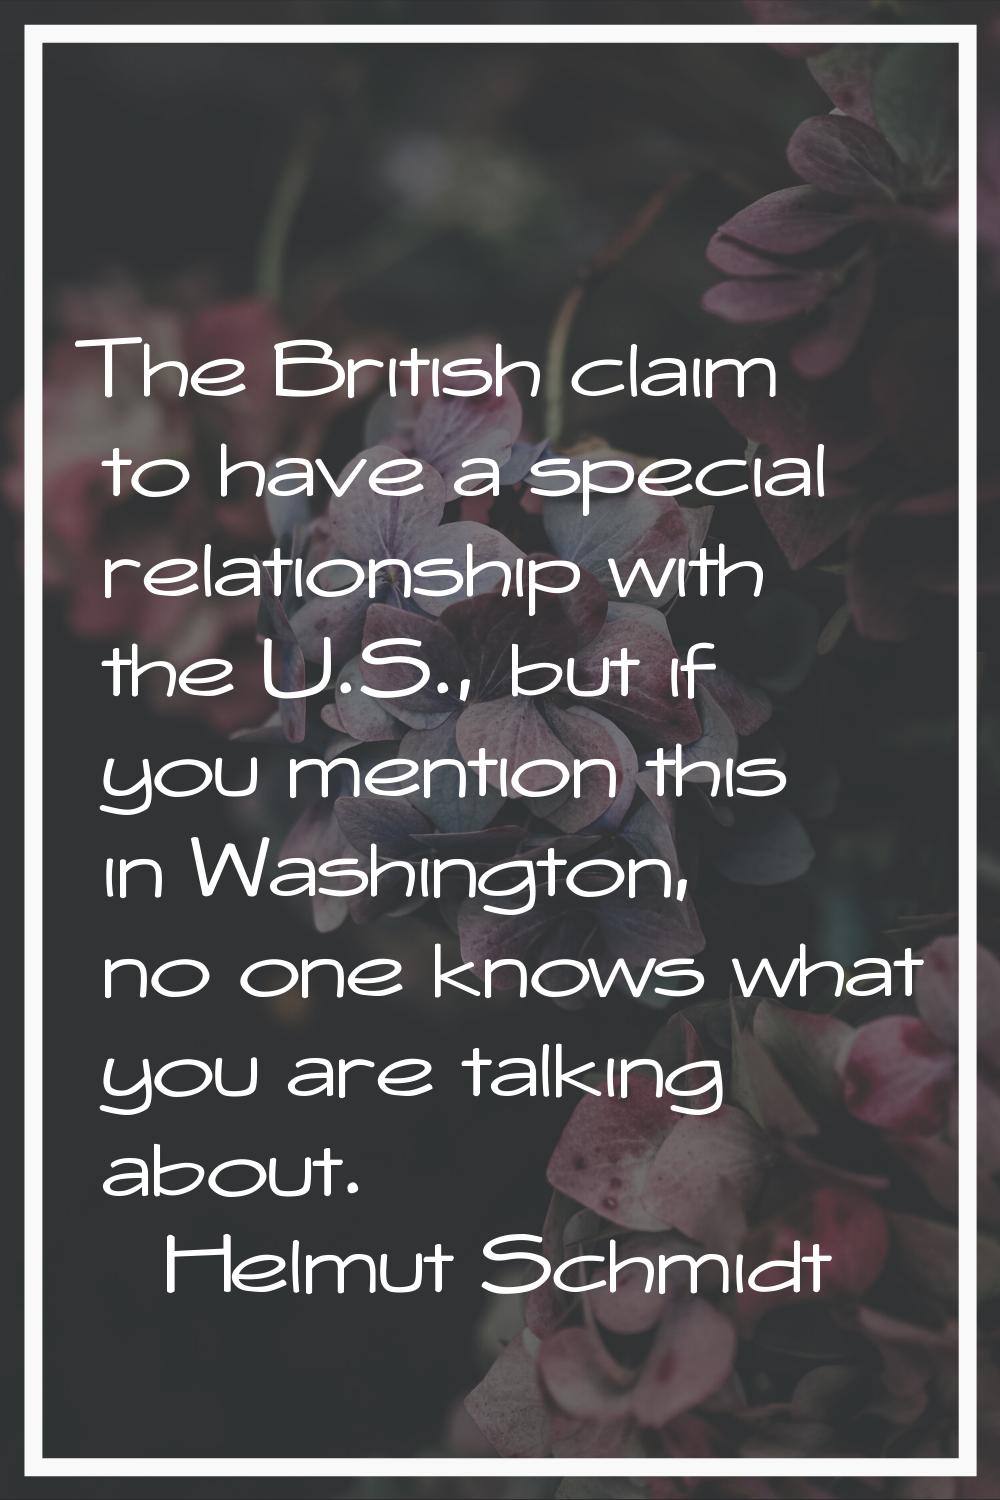 The British claim to have a special relationship with the U.S., but if you mention this in Washingt